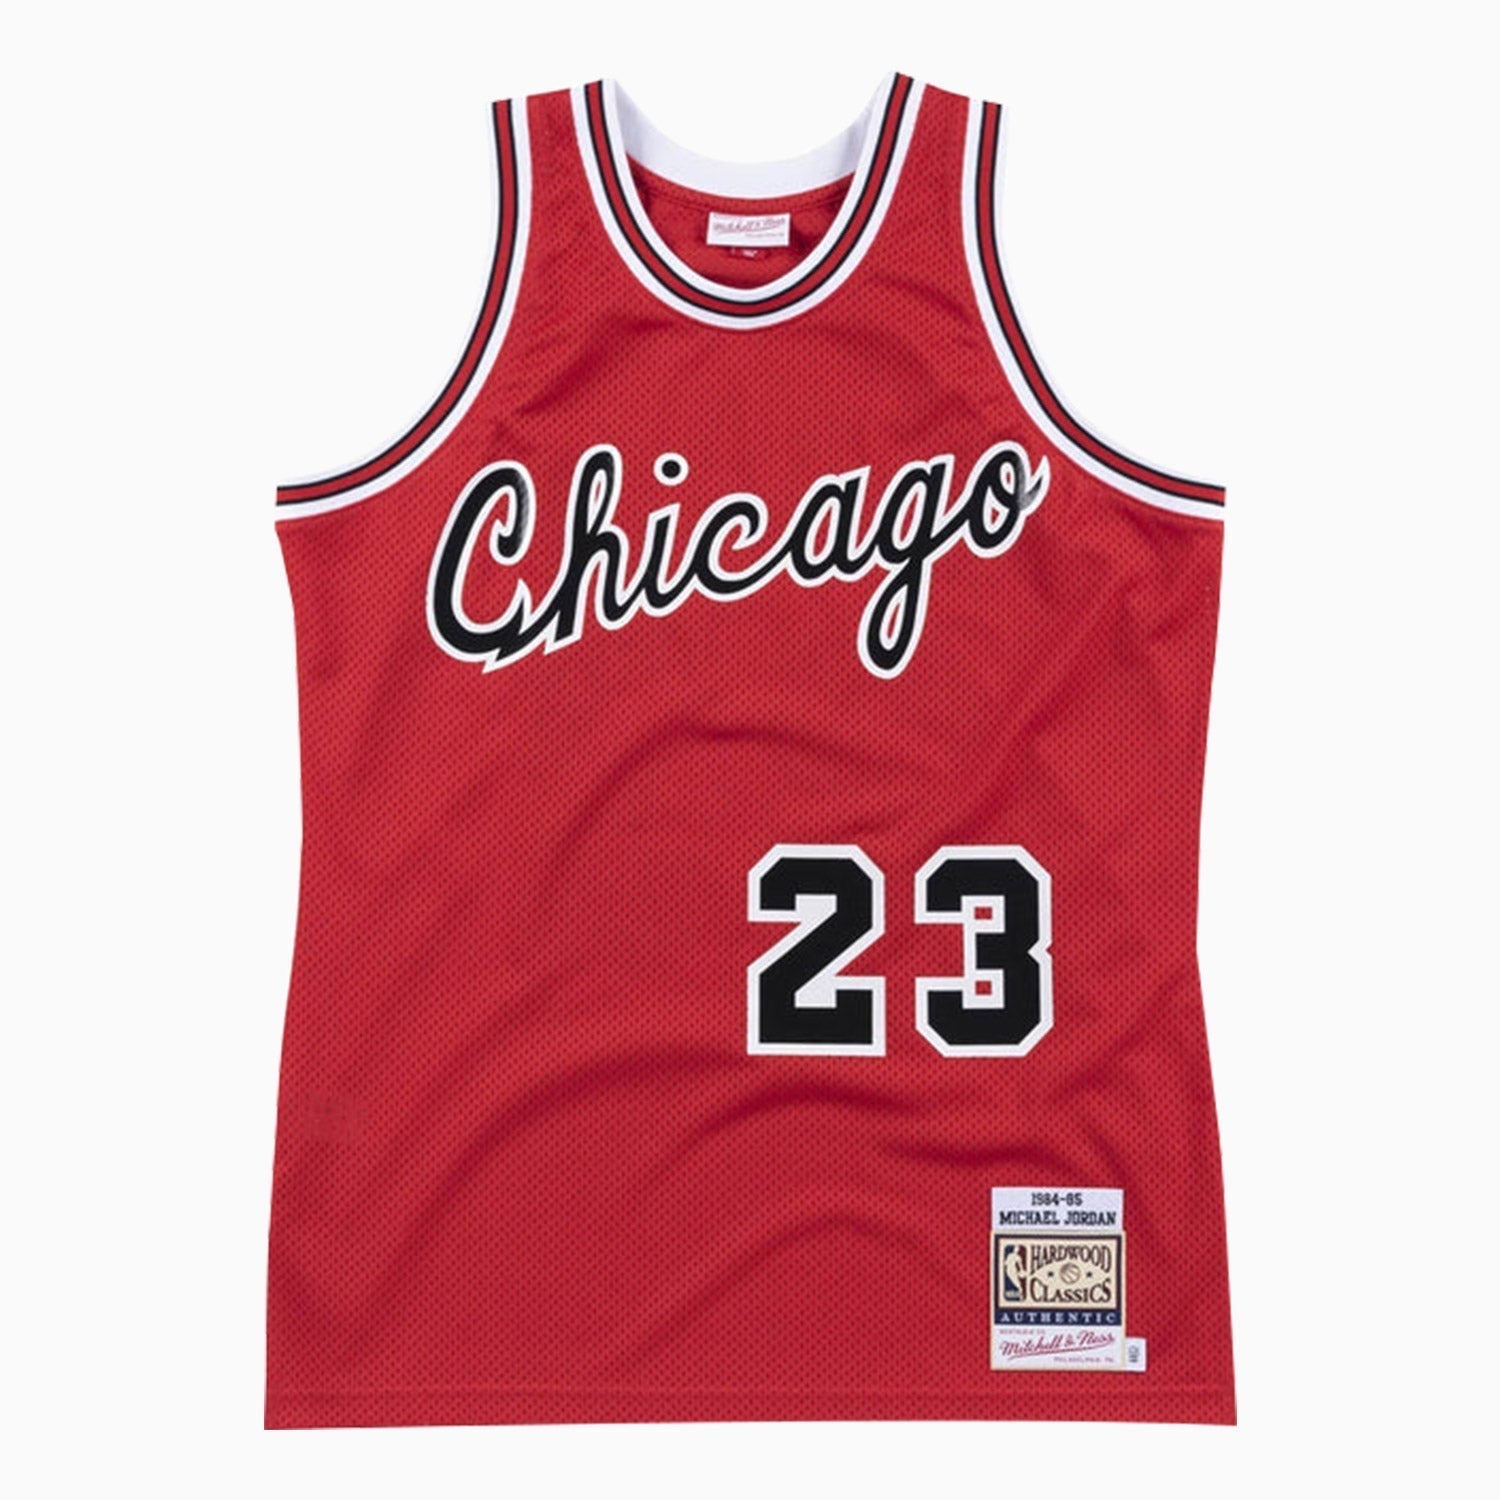 Mitchell & Ness Authentic Michael Jordan Chicago Bulls NBA 1984-85 Jersey Youth - Color: Red - Kids Premium Clothing -